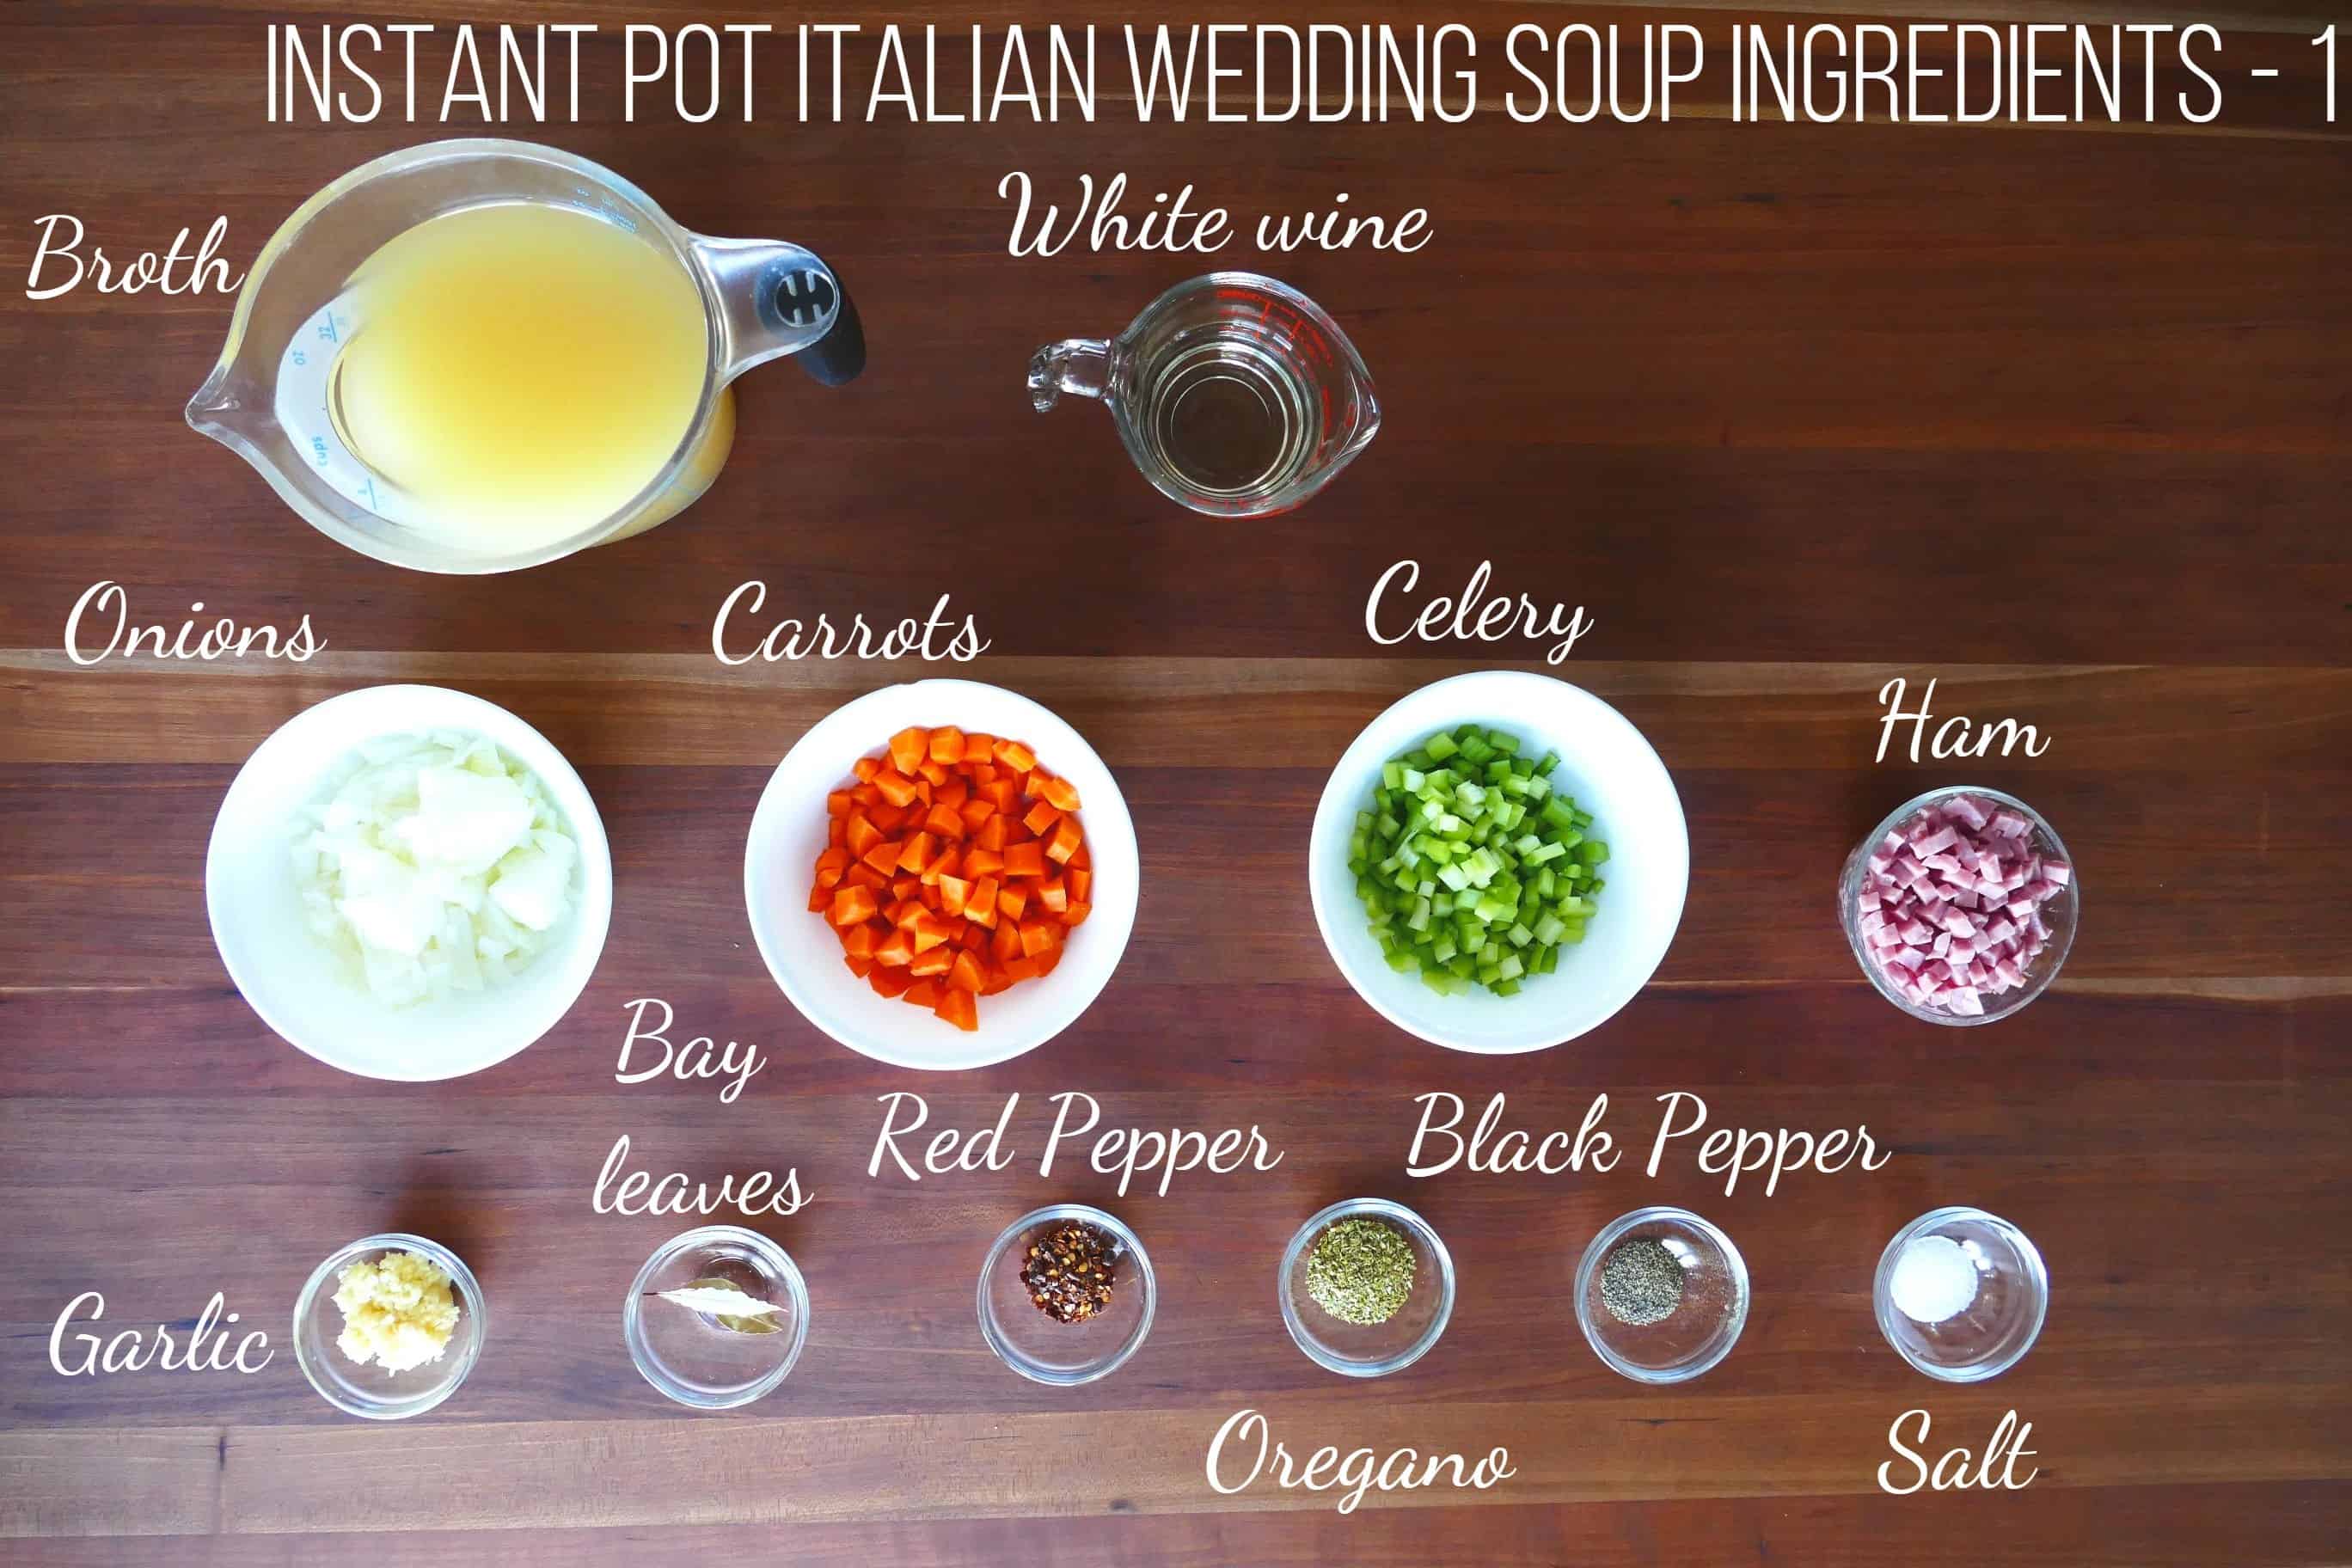 Instant Pot Italian Wedding Soup Ingredients 1 - broth, white wine, onions, carrots, celery, ham, garlic, bay leaves, red pepper, oregano, black pepper, salt - Paint the Kitchen Red